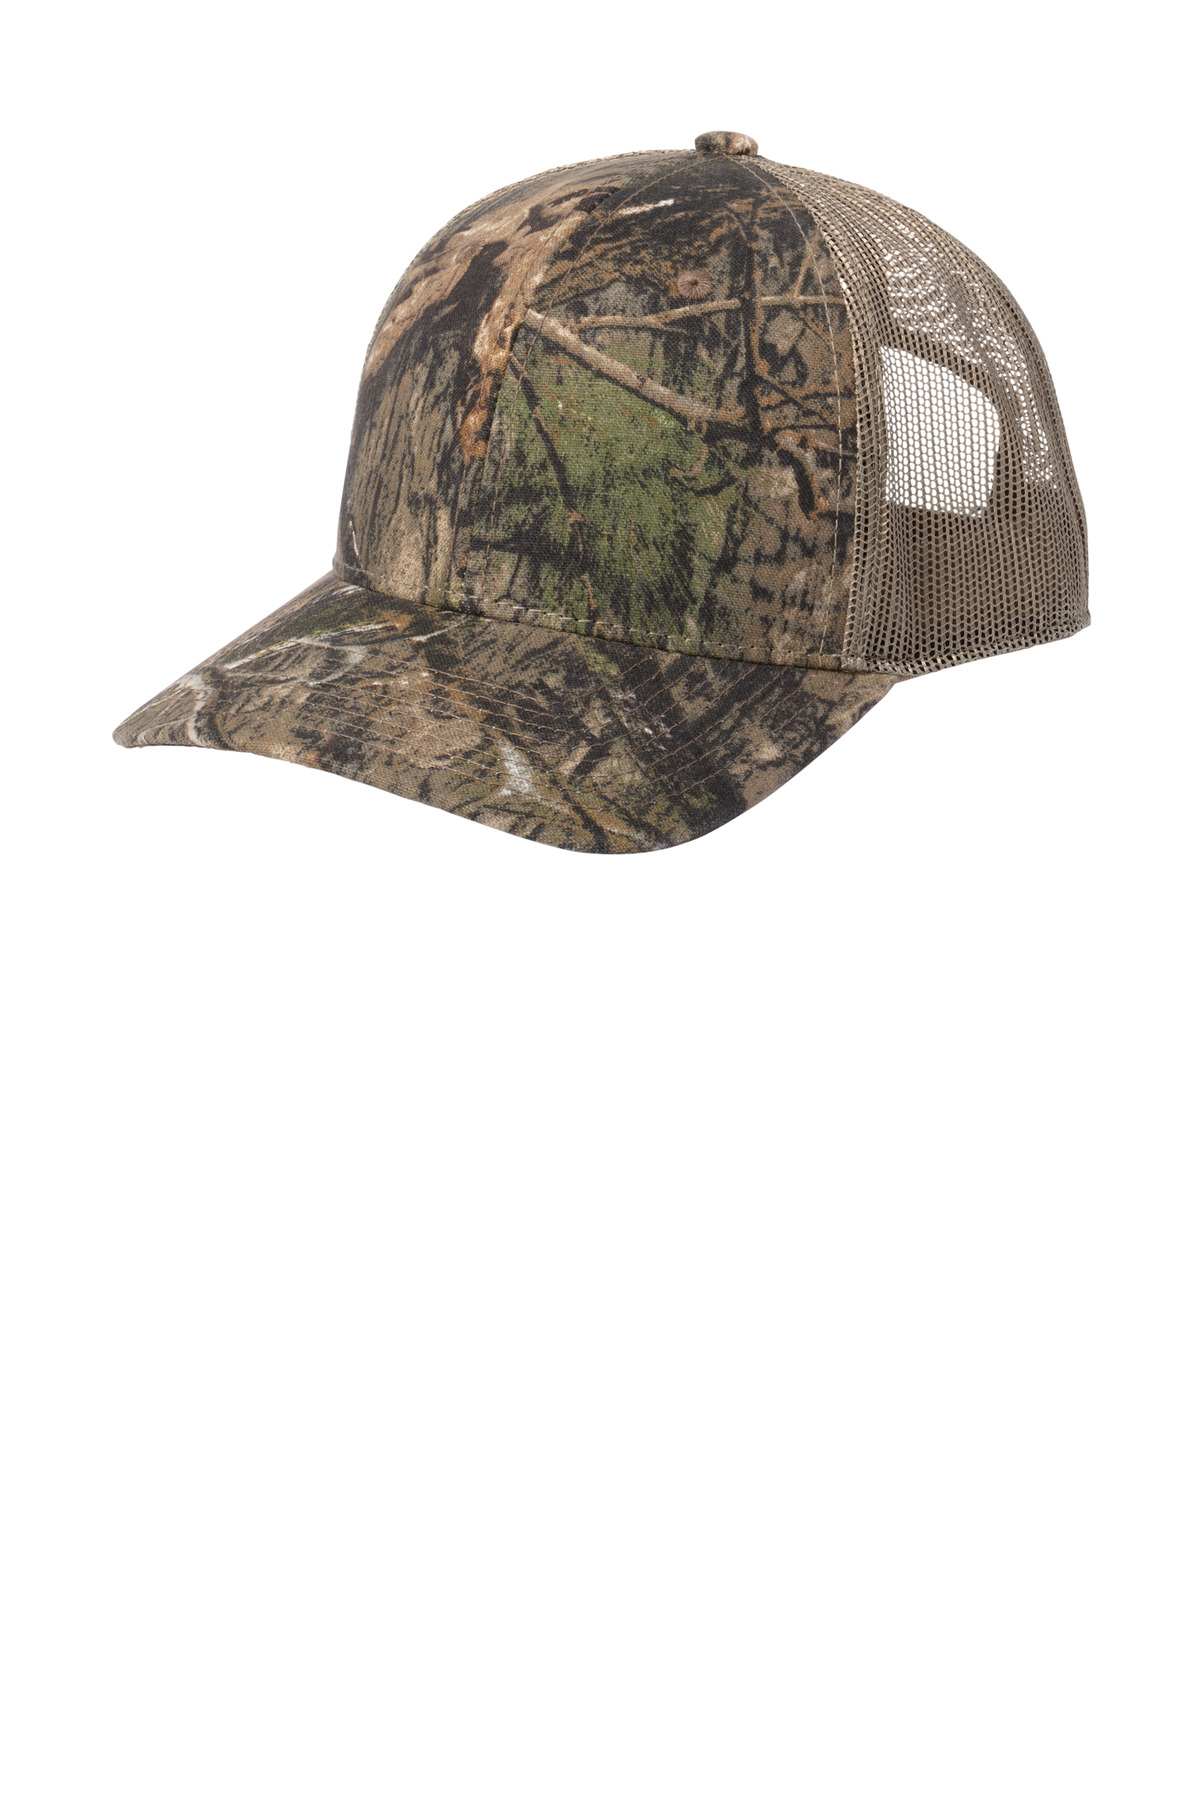 Russell Outdoors Camo Snapback Trucker Cap-Russell Outdoors